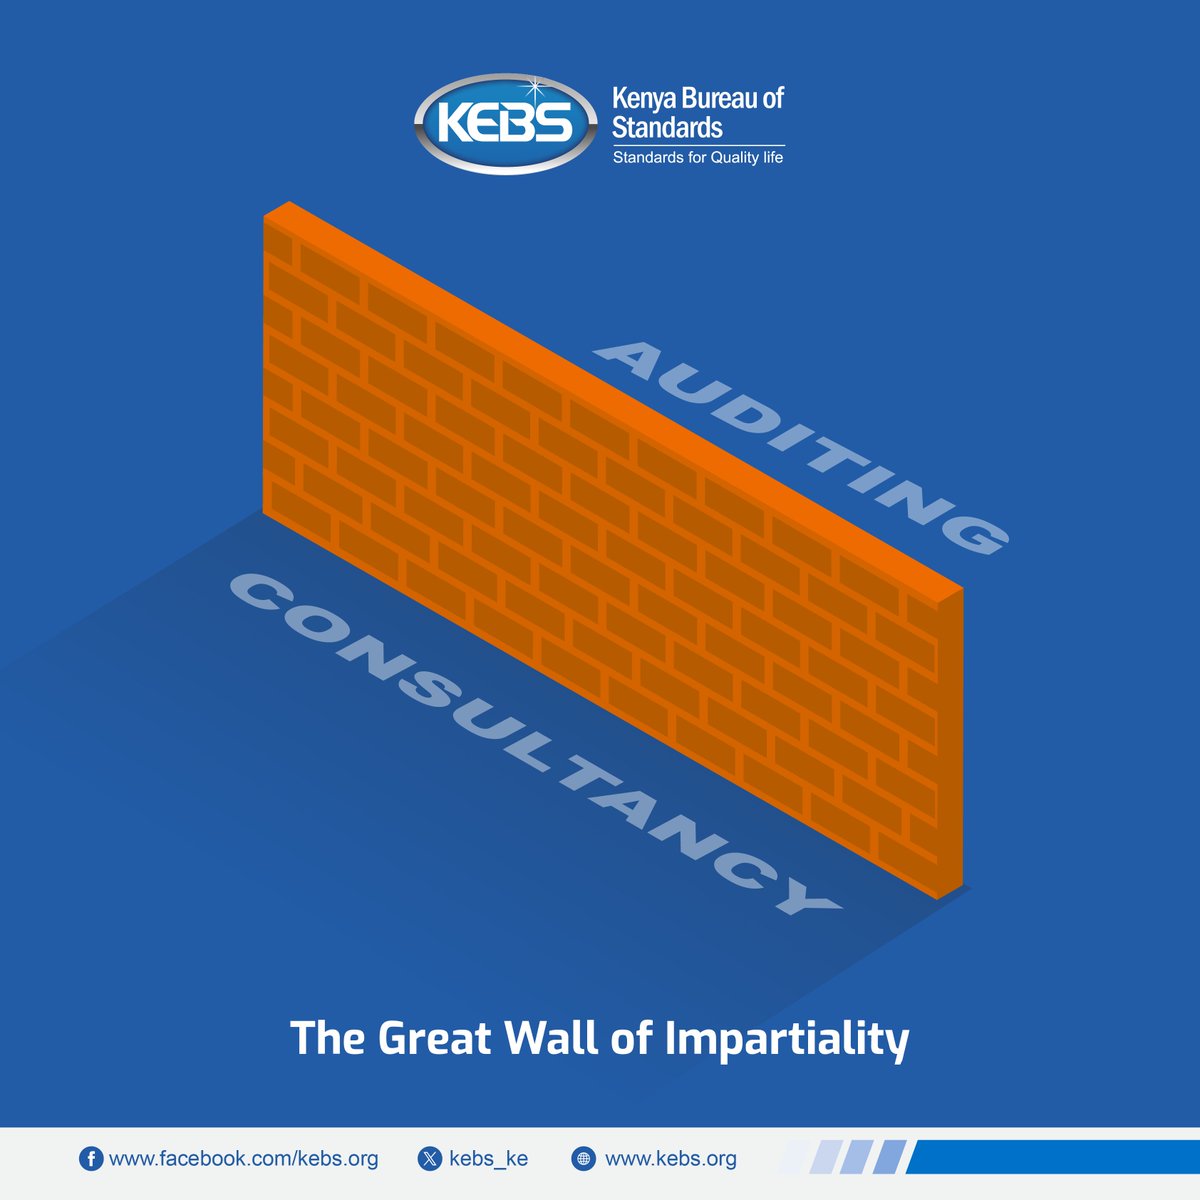 We’ve built more than a policy; we’ve erected a fortress of impartiality, guarding the sanctity of certification. In this castle, bias is the dragon we’ve already slayed. #ImpartialityFortress #CertificationKnights #StandardsforQualityLife #QualityMatters ^JKK